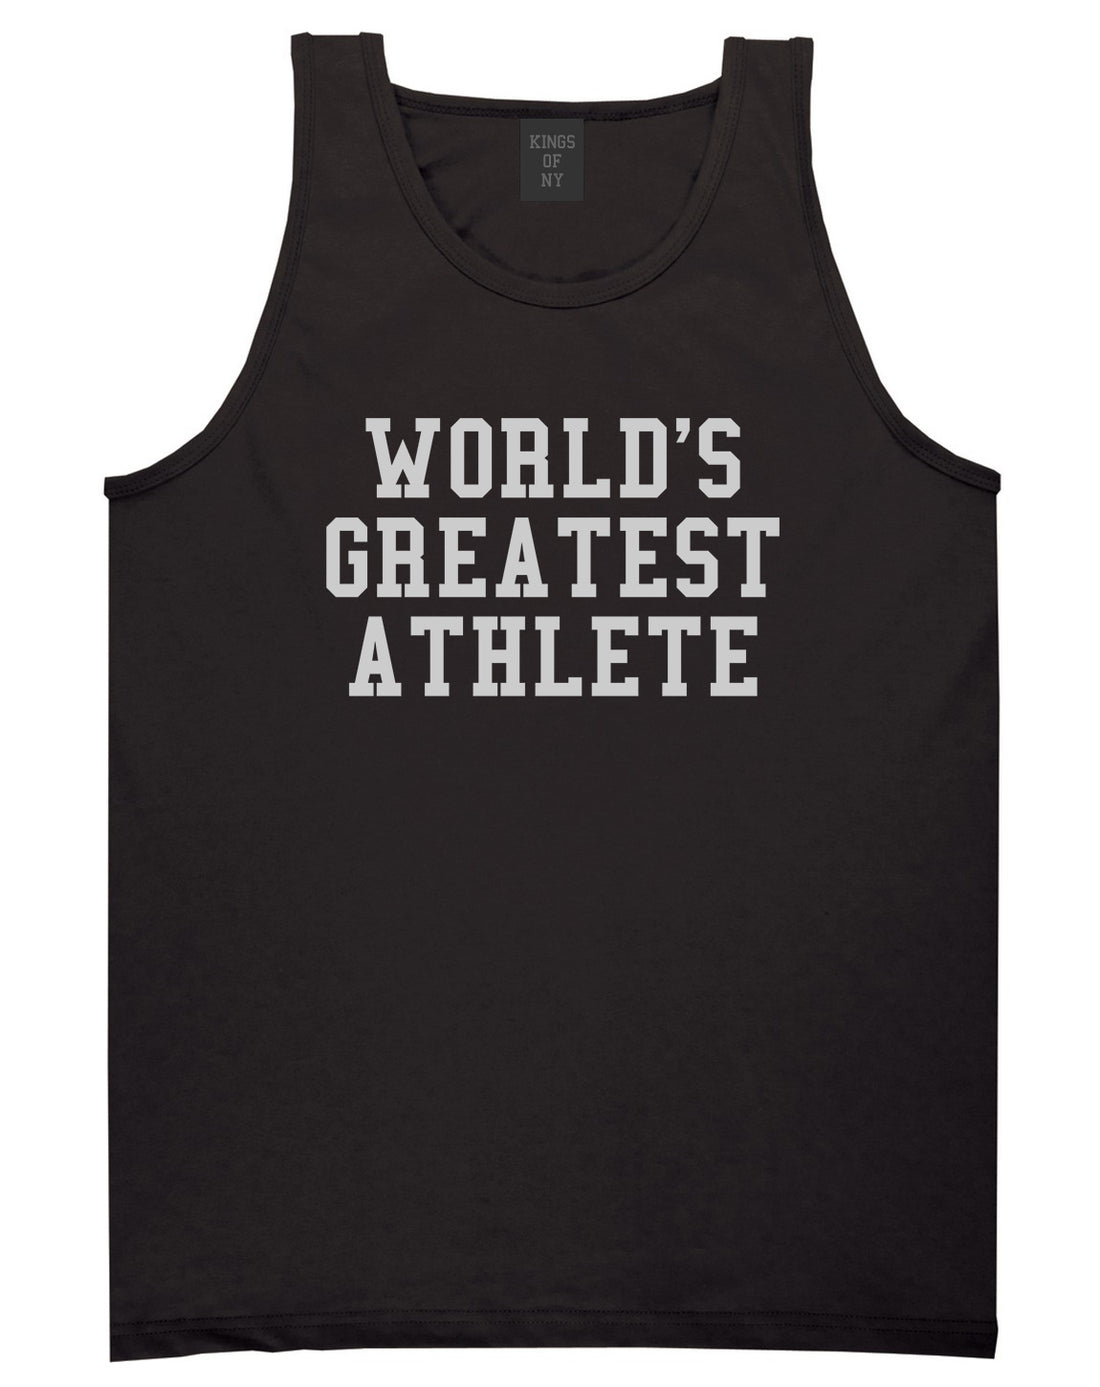 Worlds Greatest Athlete Funny Sports Mens Tank Top T-Shirt Black